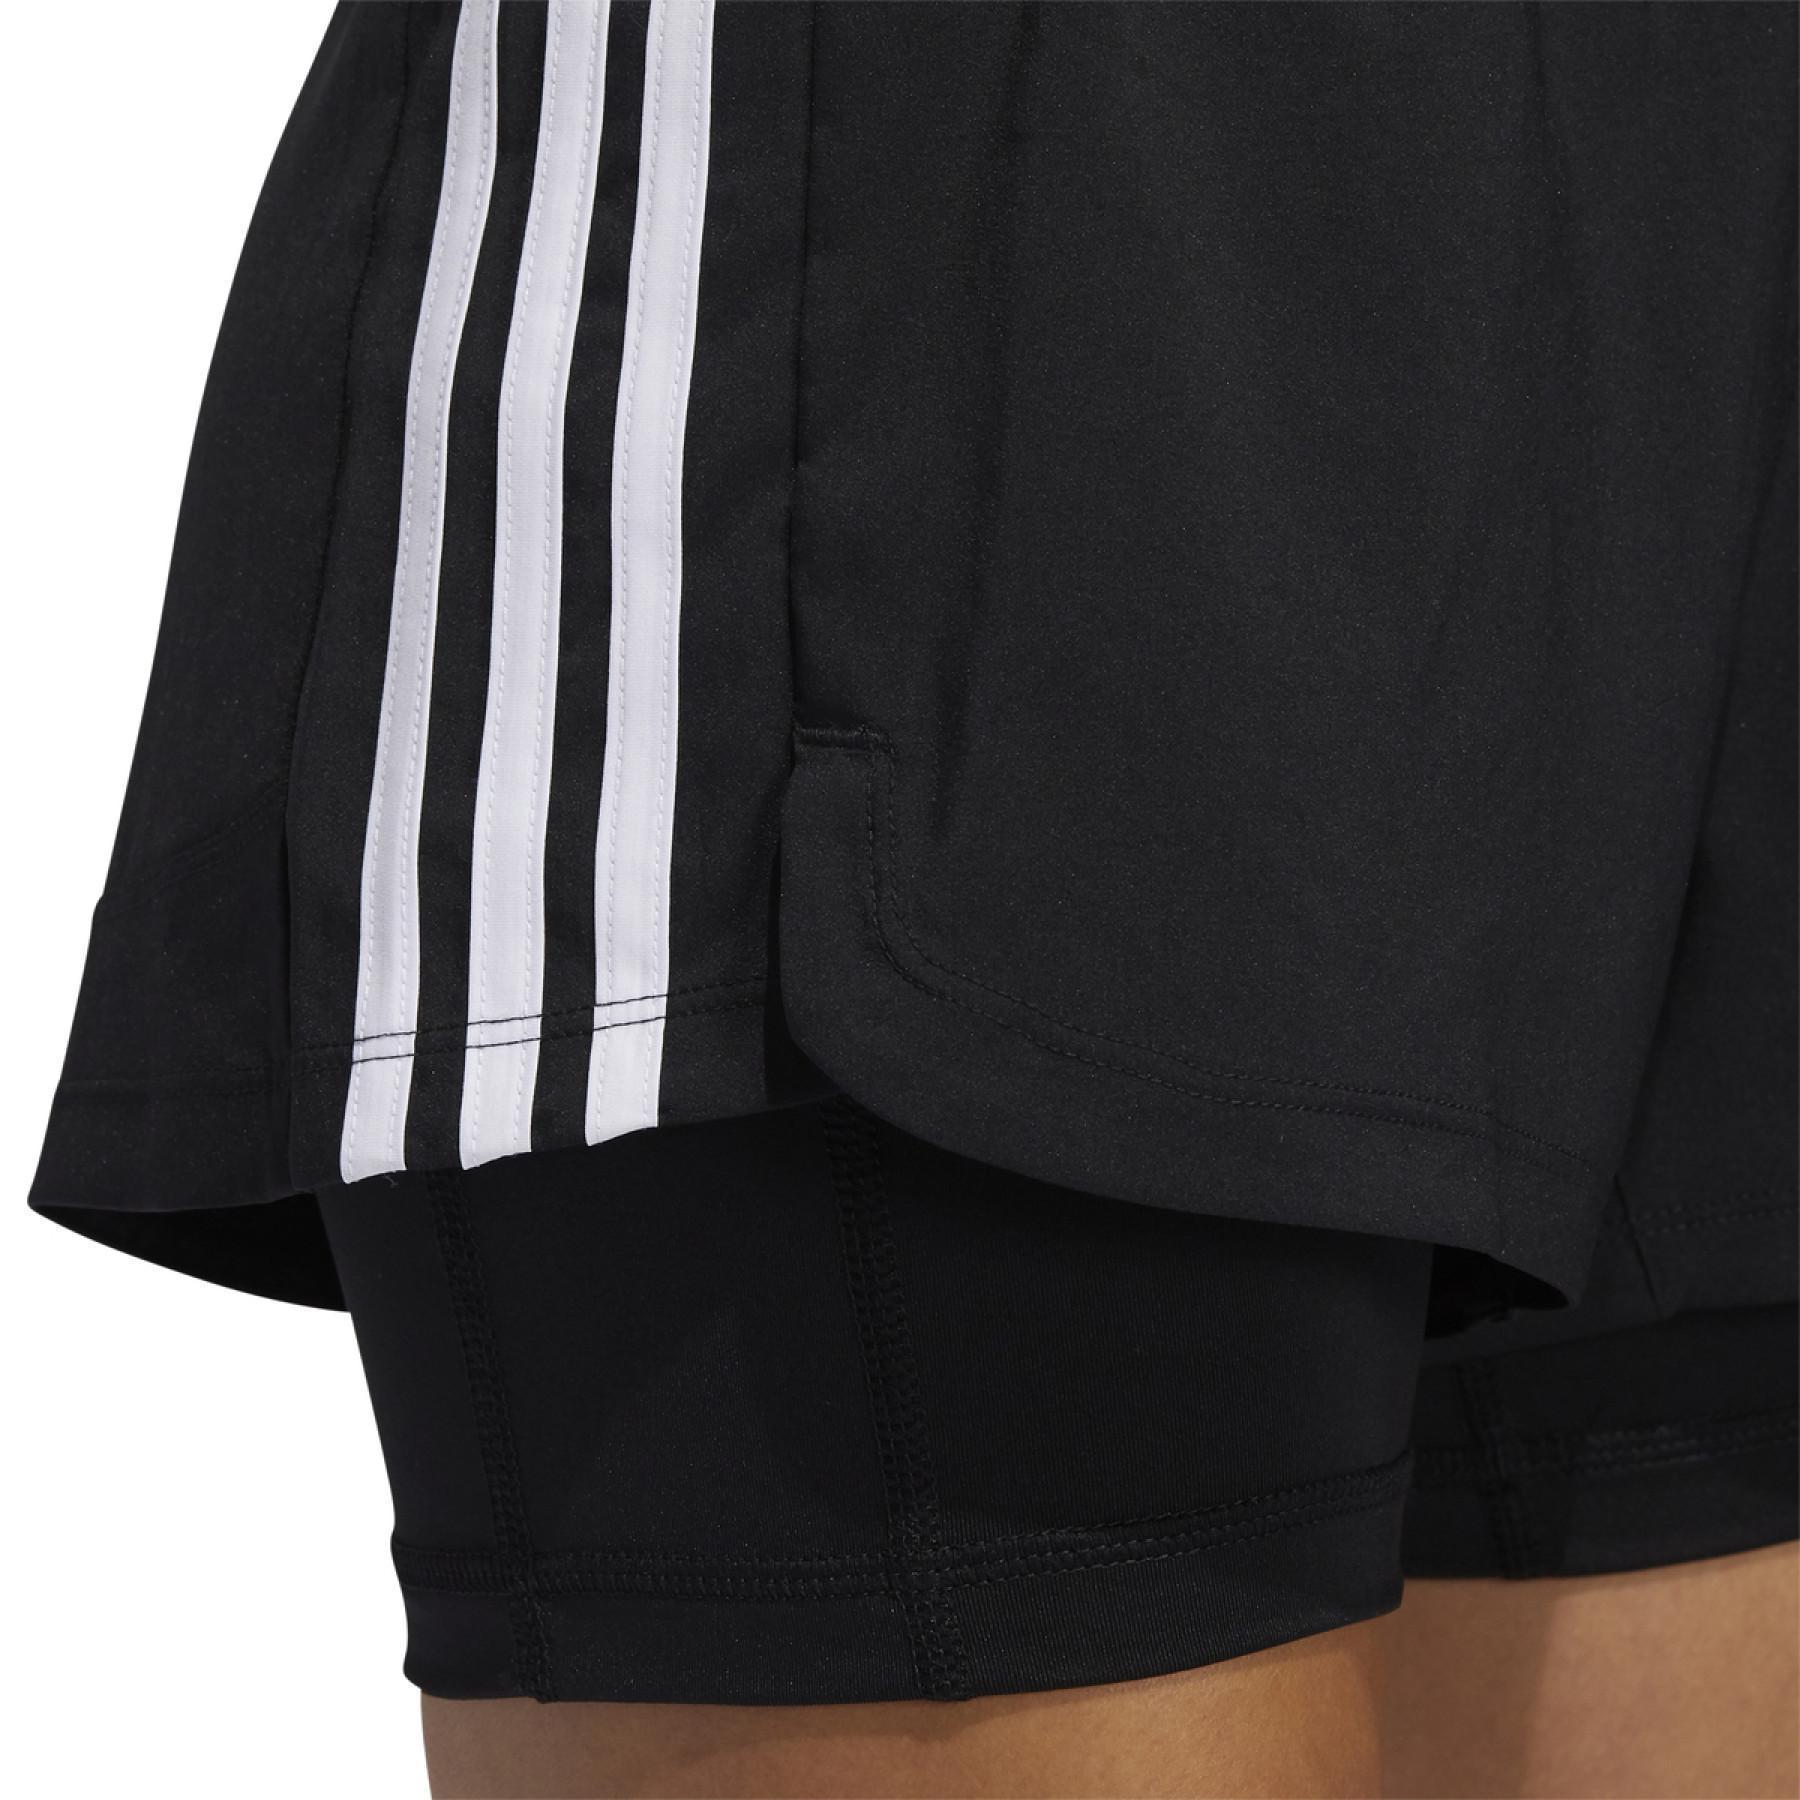 Pantalón corto de mujer adidas Pacer 3-Bandes Woven Two-in-One